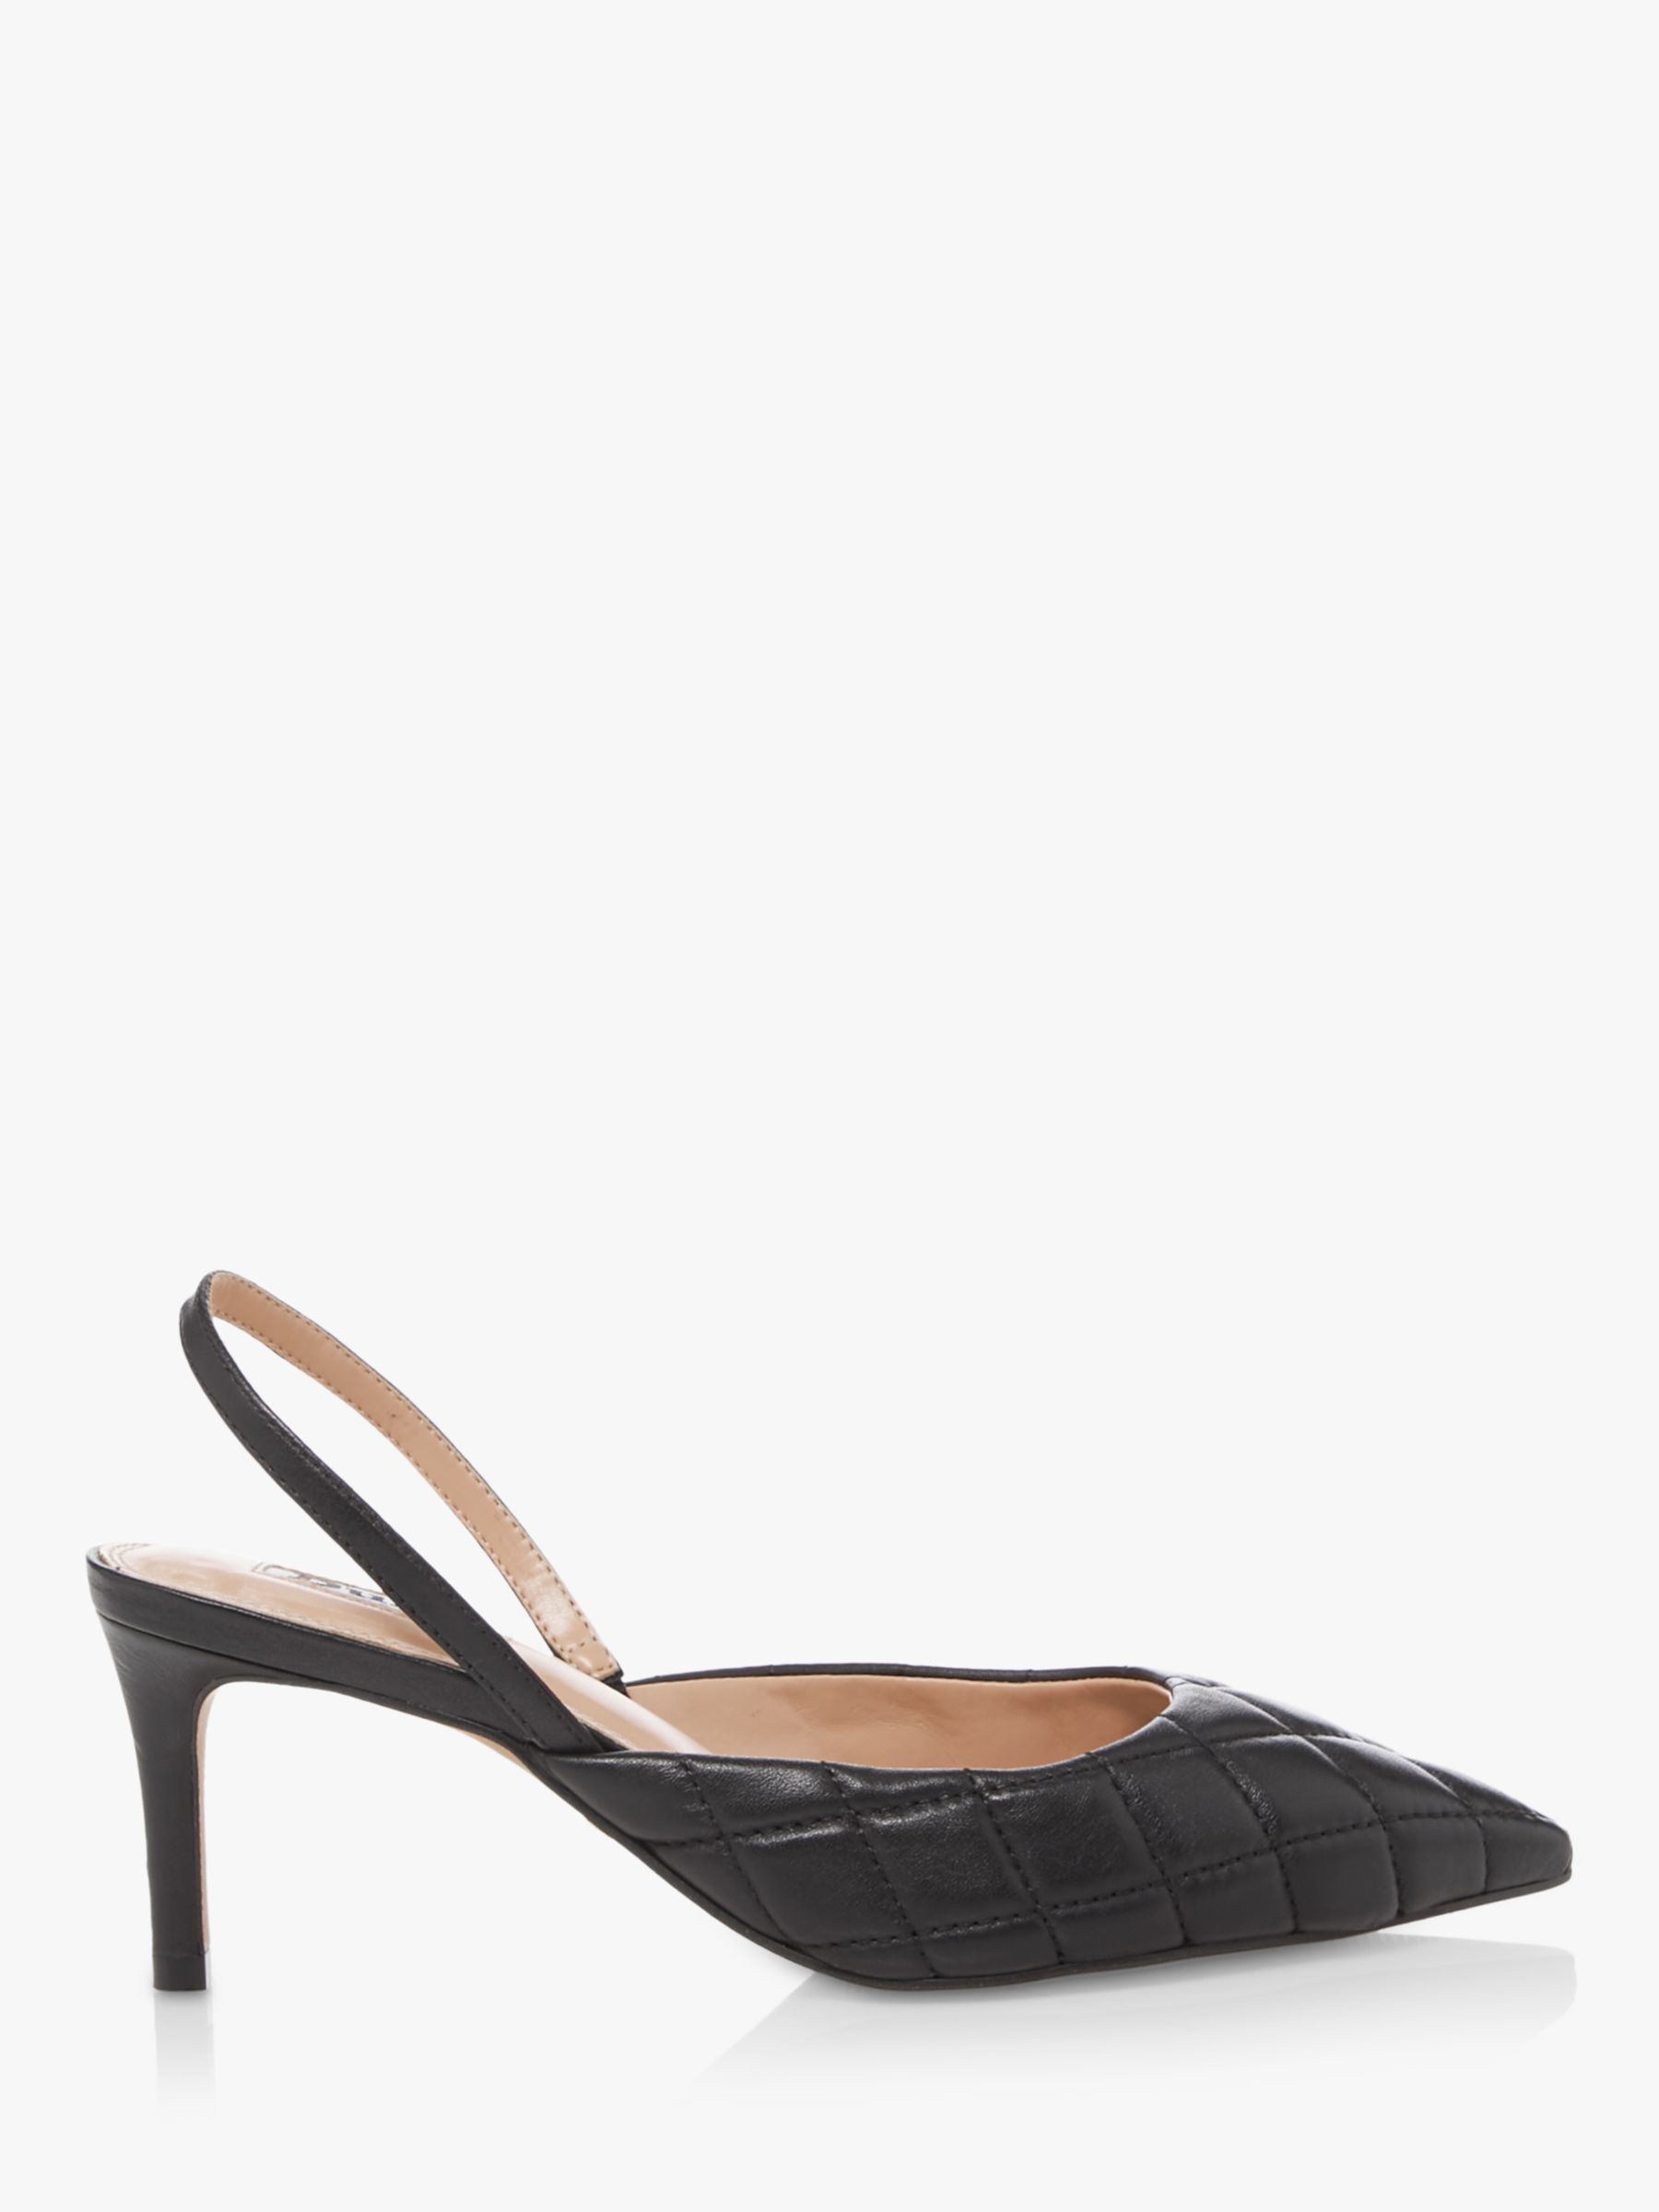 Dune Cammie Leather Quilted Slingback Heels, Black